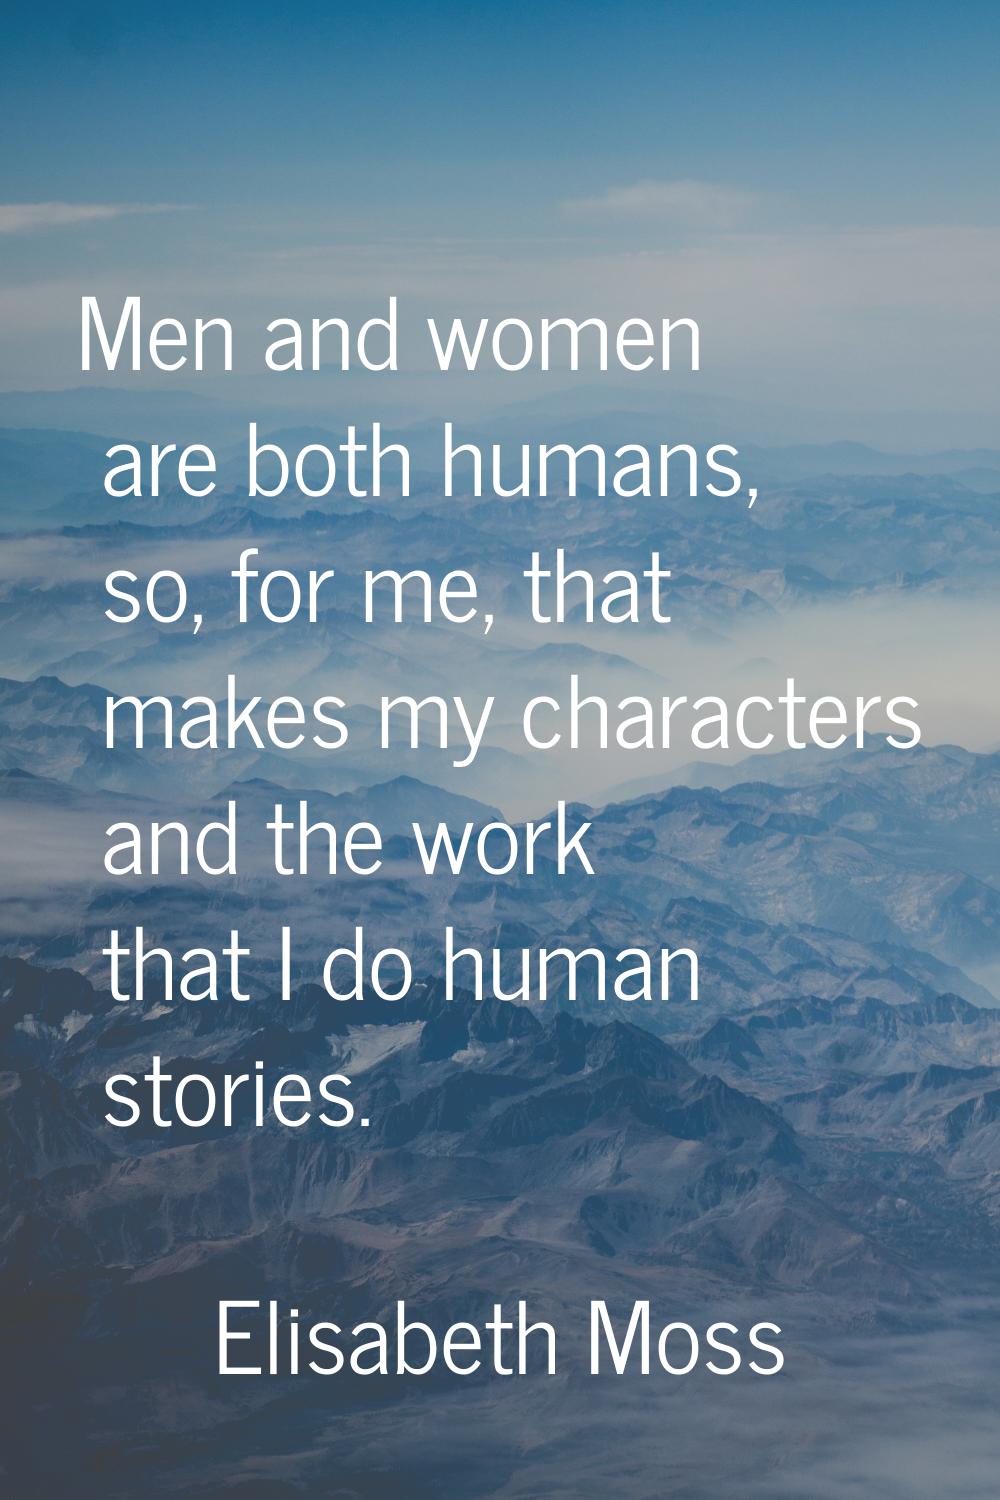 Men and women are both humans, so, for me, that makes my characters and the work that I do human st